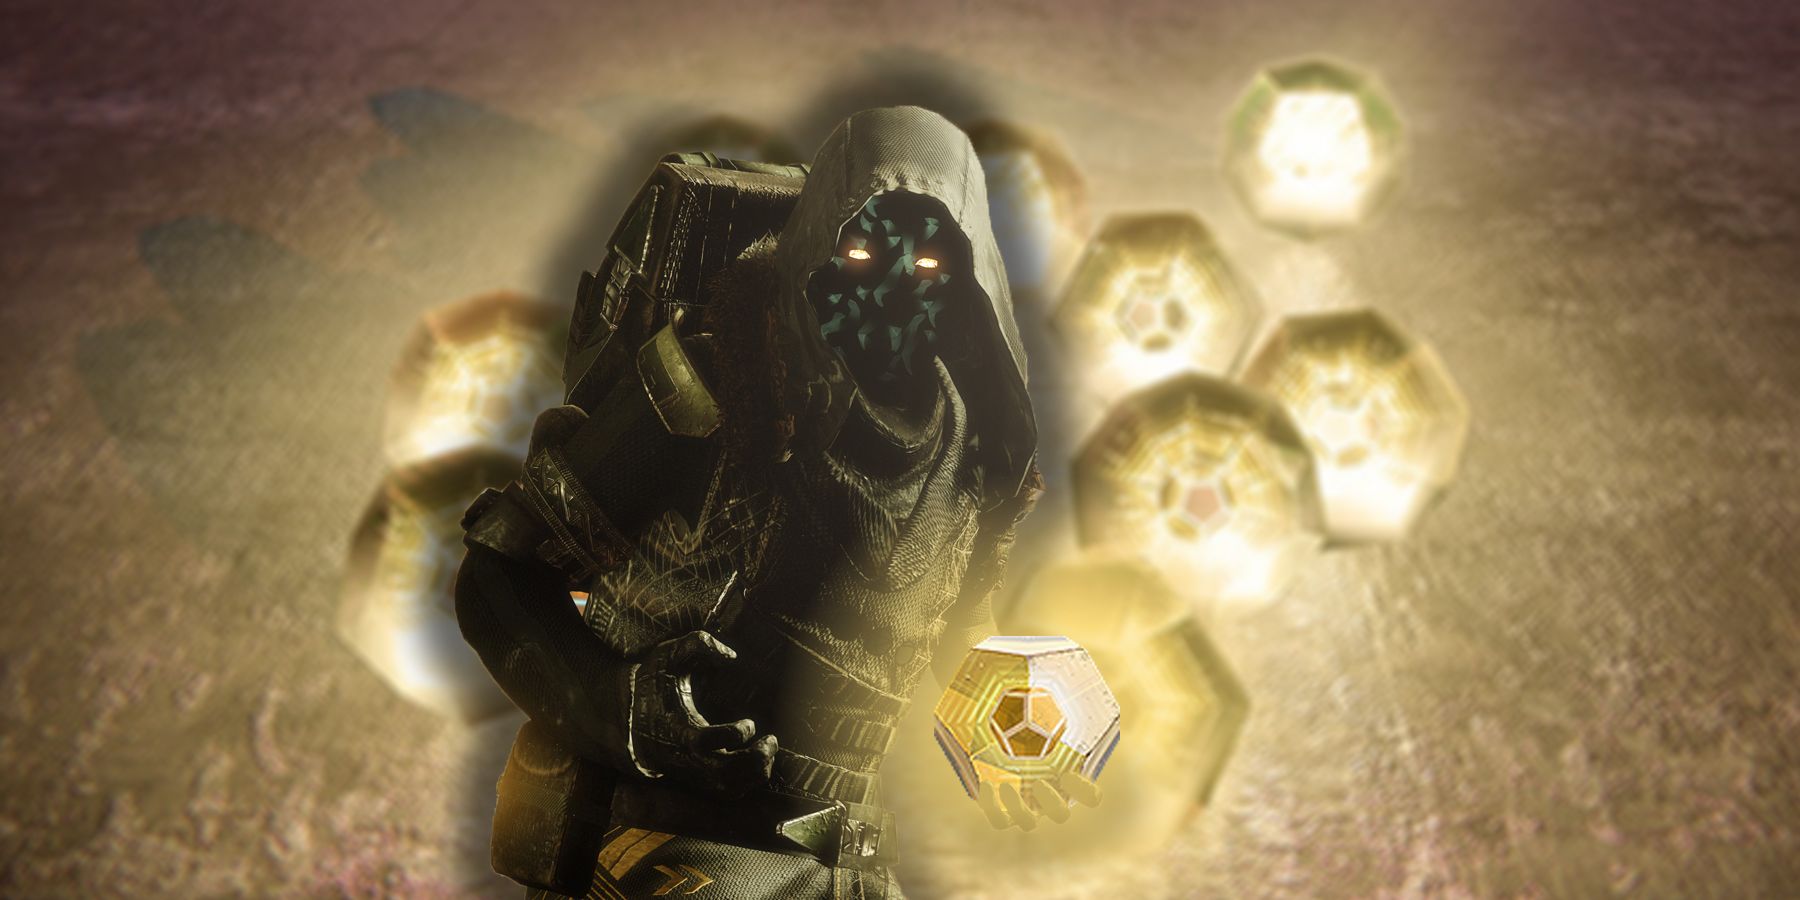 Xur holding an exotic engram in Destiny 2 with a pile of exotic engrams behind him.